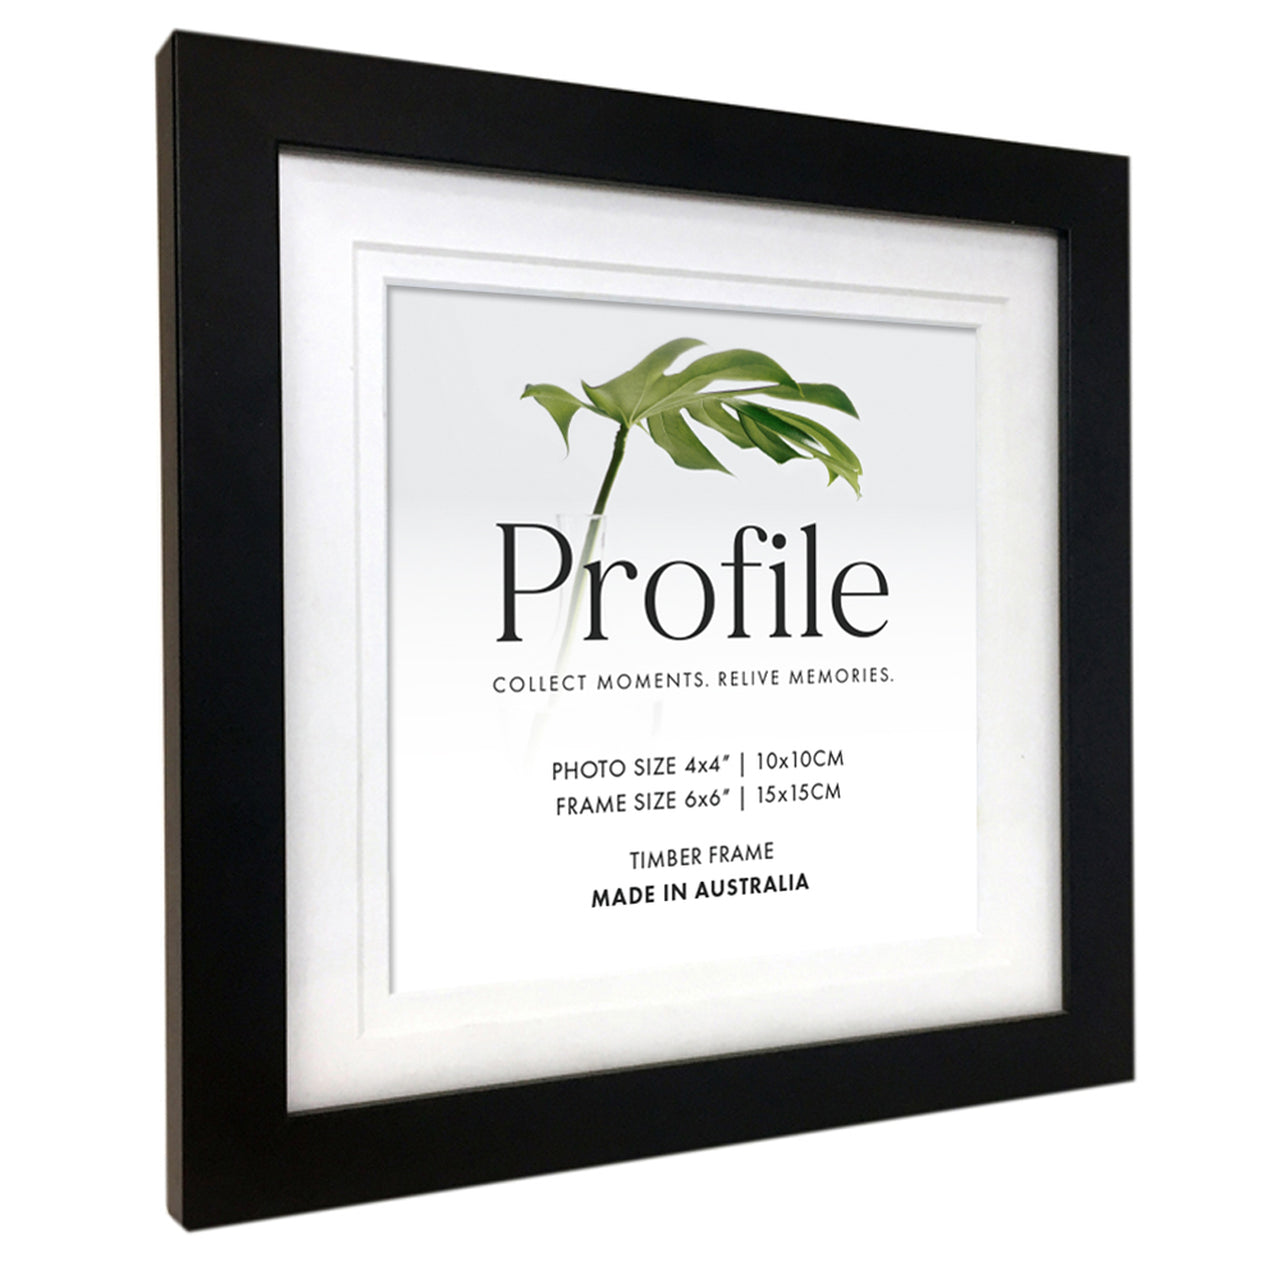 Deluxe Black 10x10 Photo Frame with 8x8 opening